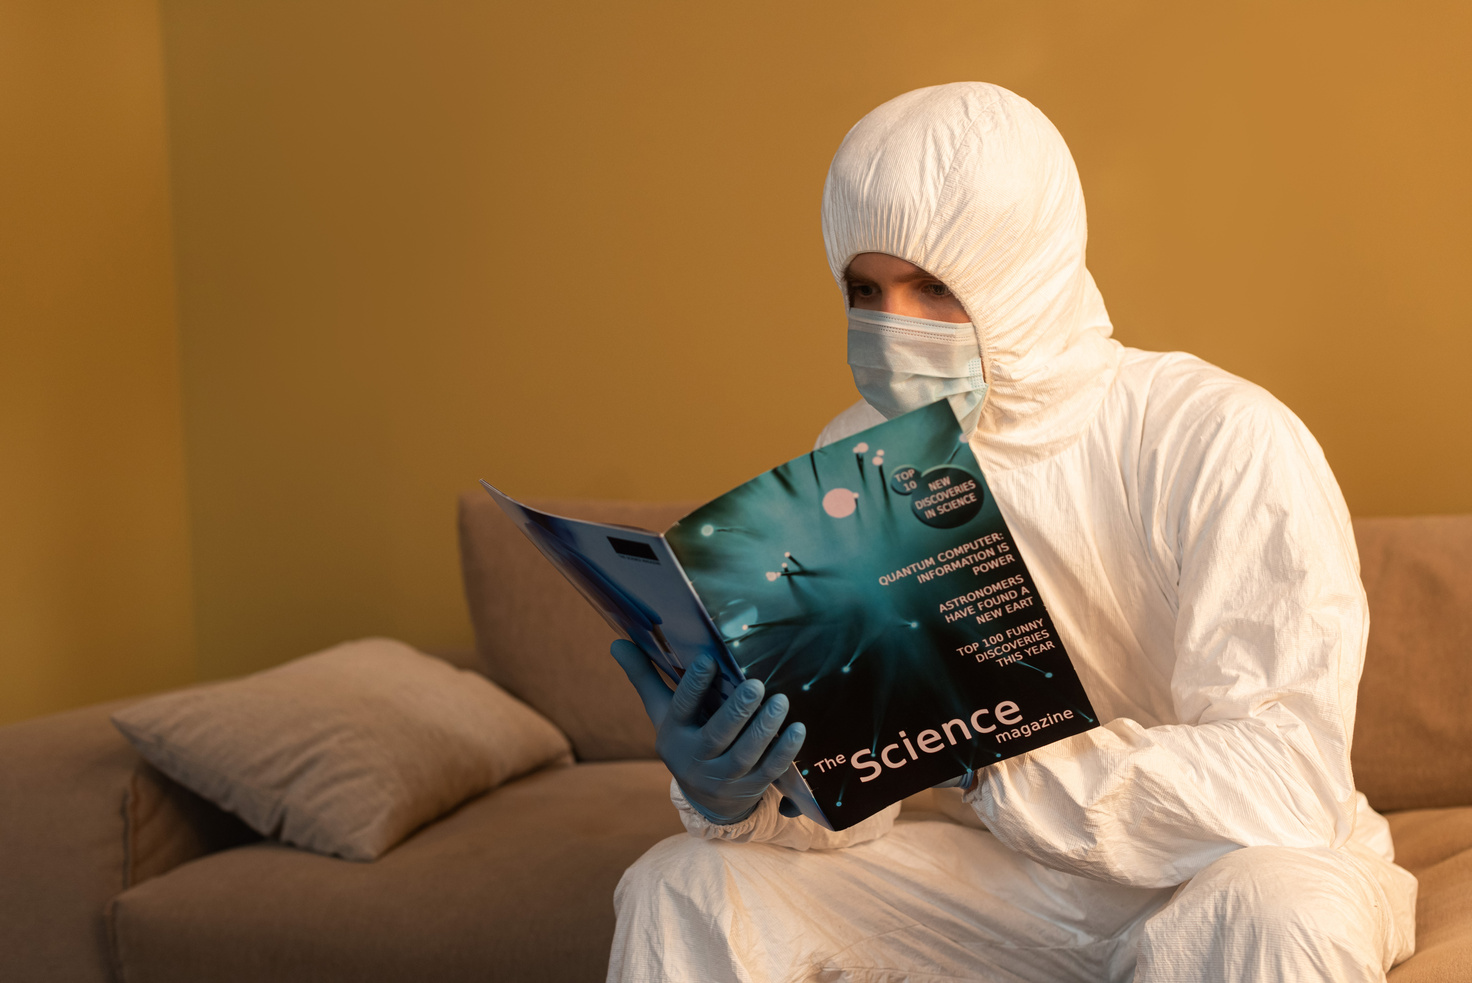 Man in hazmat suit, medical mask and latex gloves reading science magazine on sofa